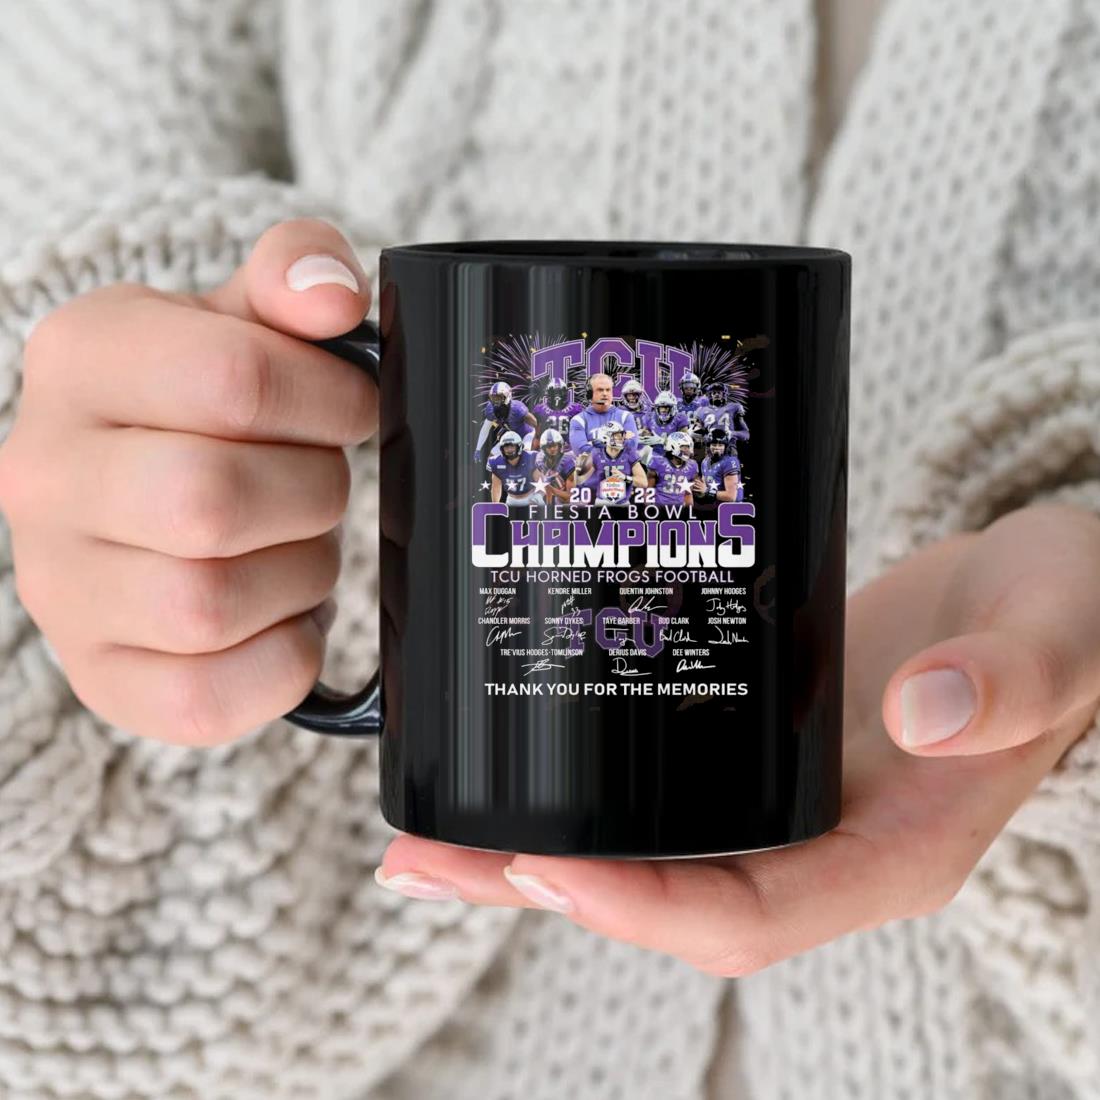 Tcu Horned Frogs Football 2022 Fiesta Bowl Champions Thank You For The Memories Signatures Mug